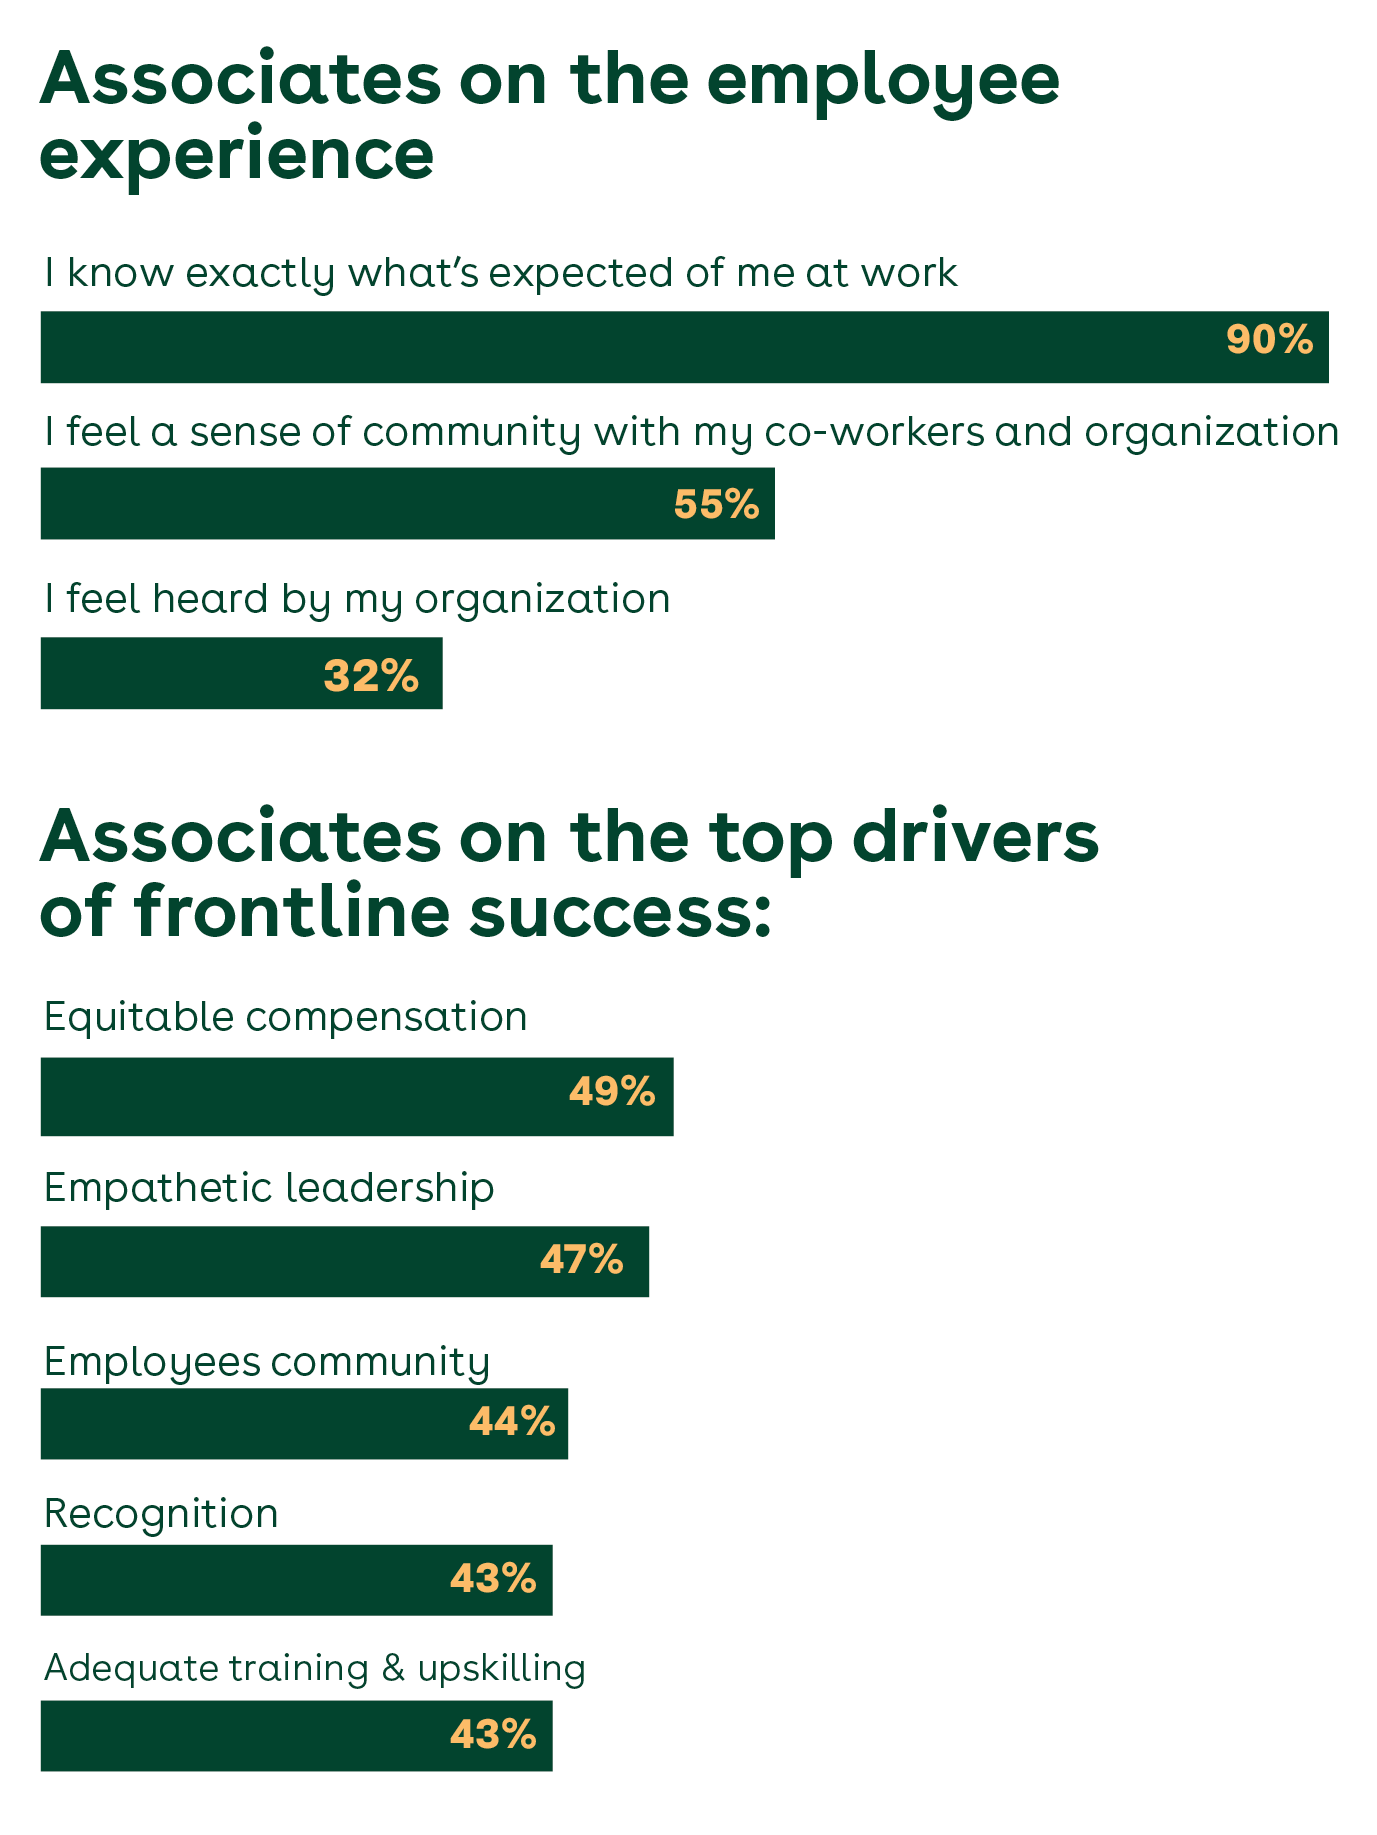 Survey responses from associates regarding employee experience and frontline success